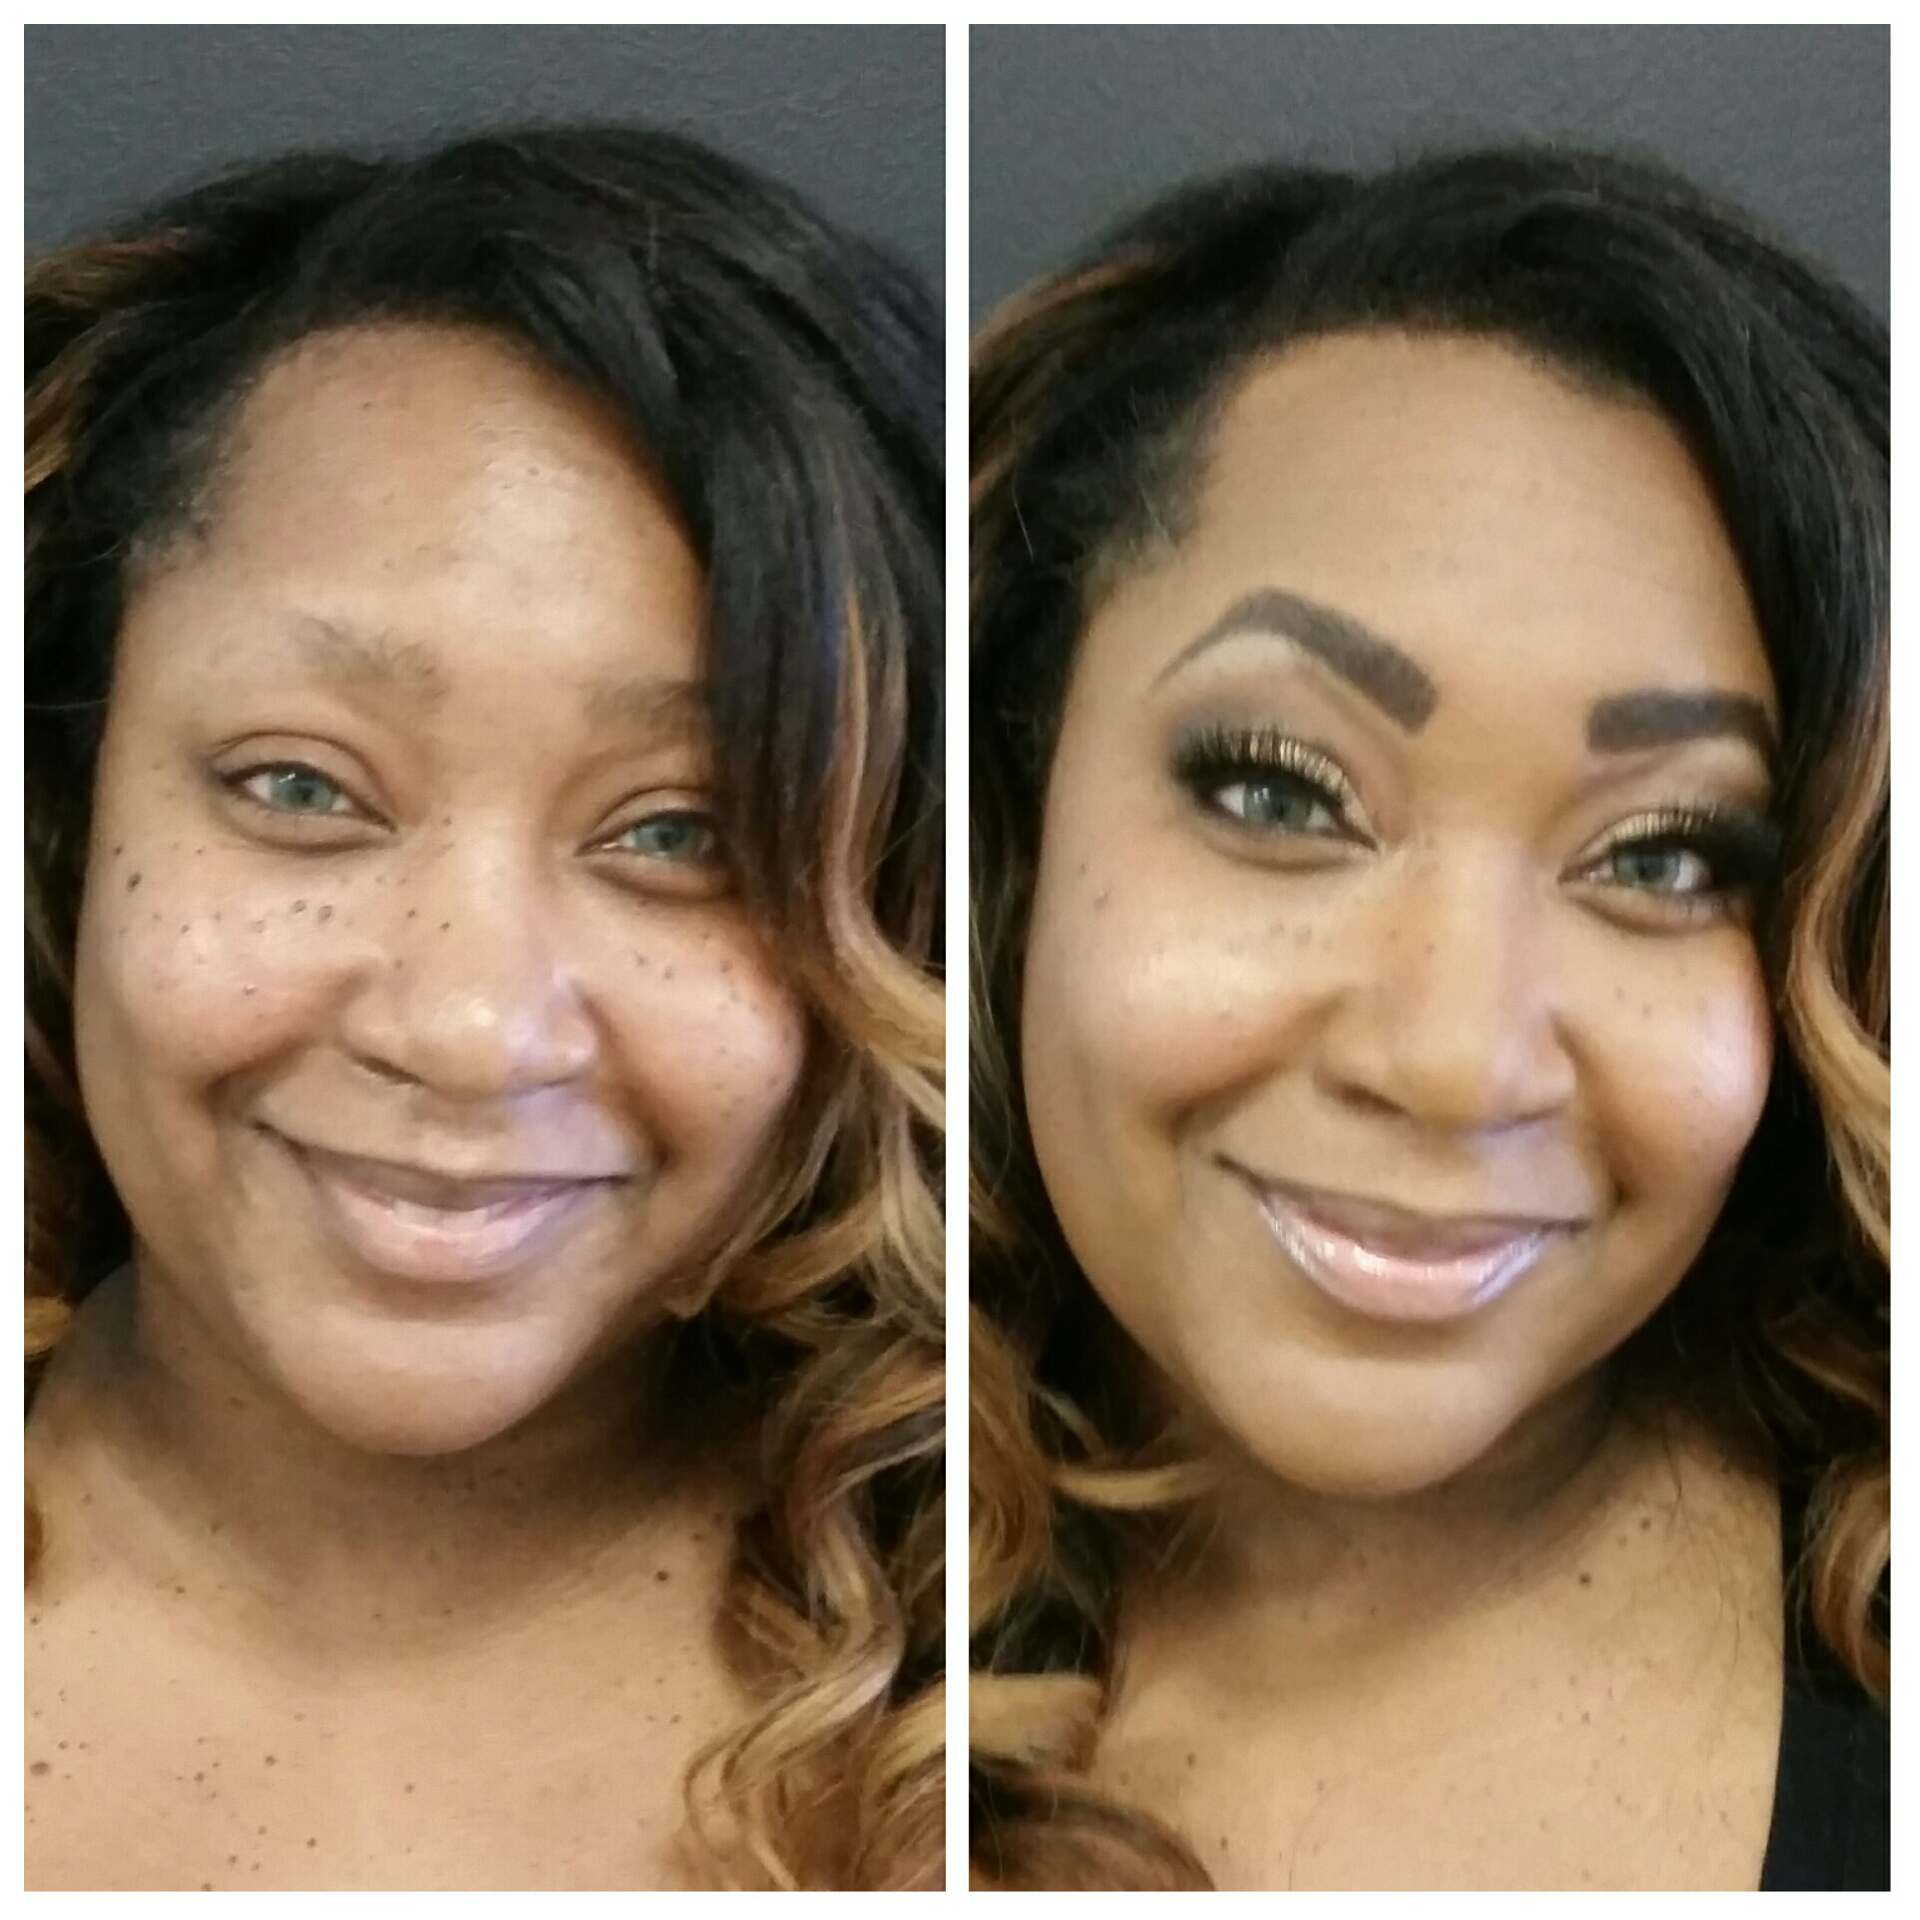 Glamorous Birthday Party Makeup with False Lashes by Luminous Beauty Makeup Artist Richfield.jpg